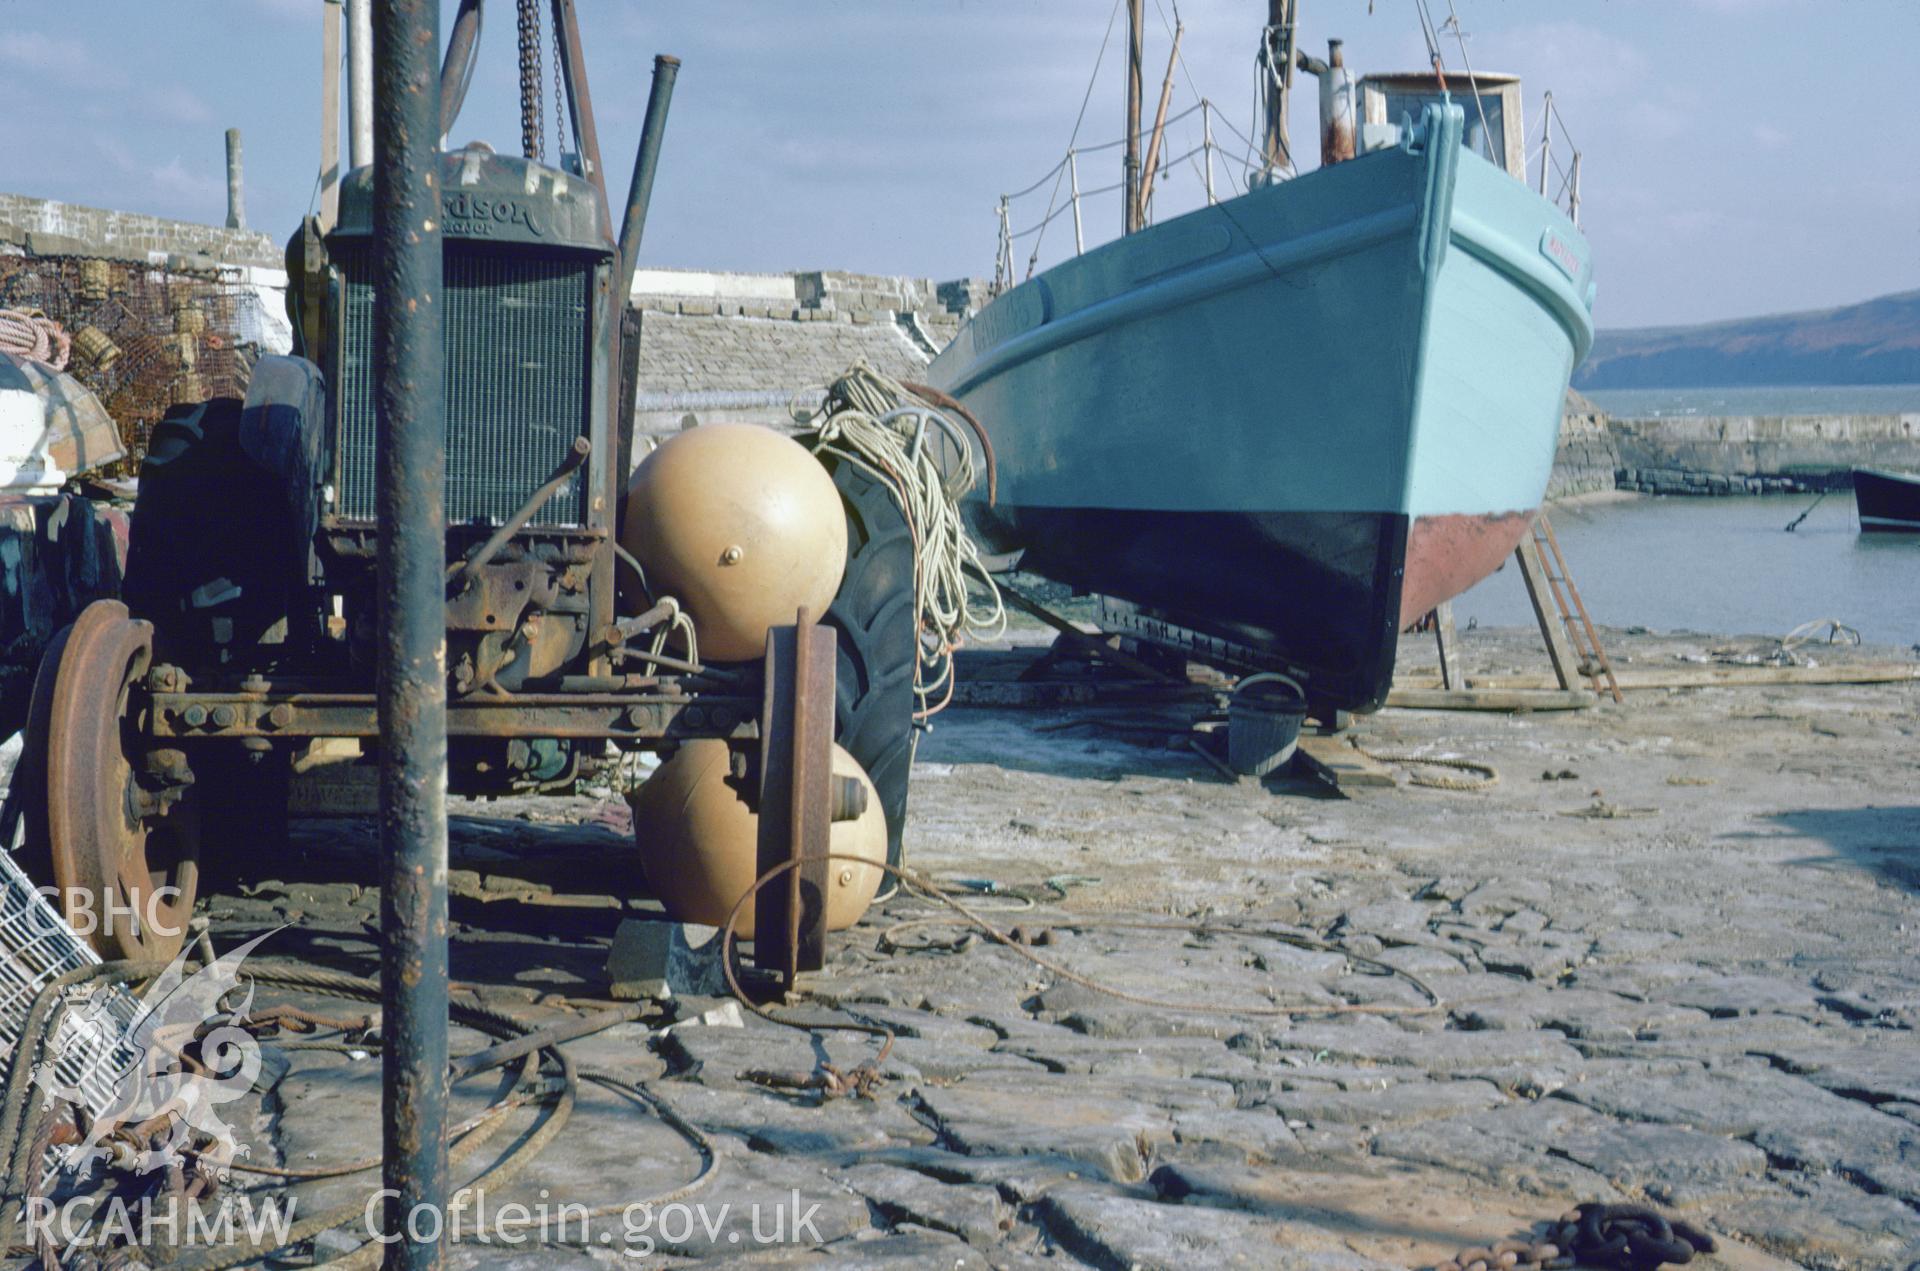 Colour 35mm slide showing a tractor and boat at New Quay Harbour, Ceredigion, by Dylan Roberts.